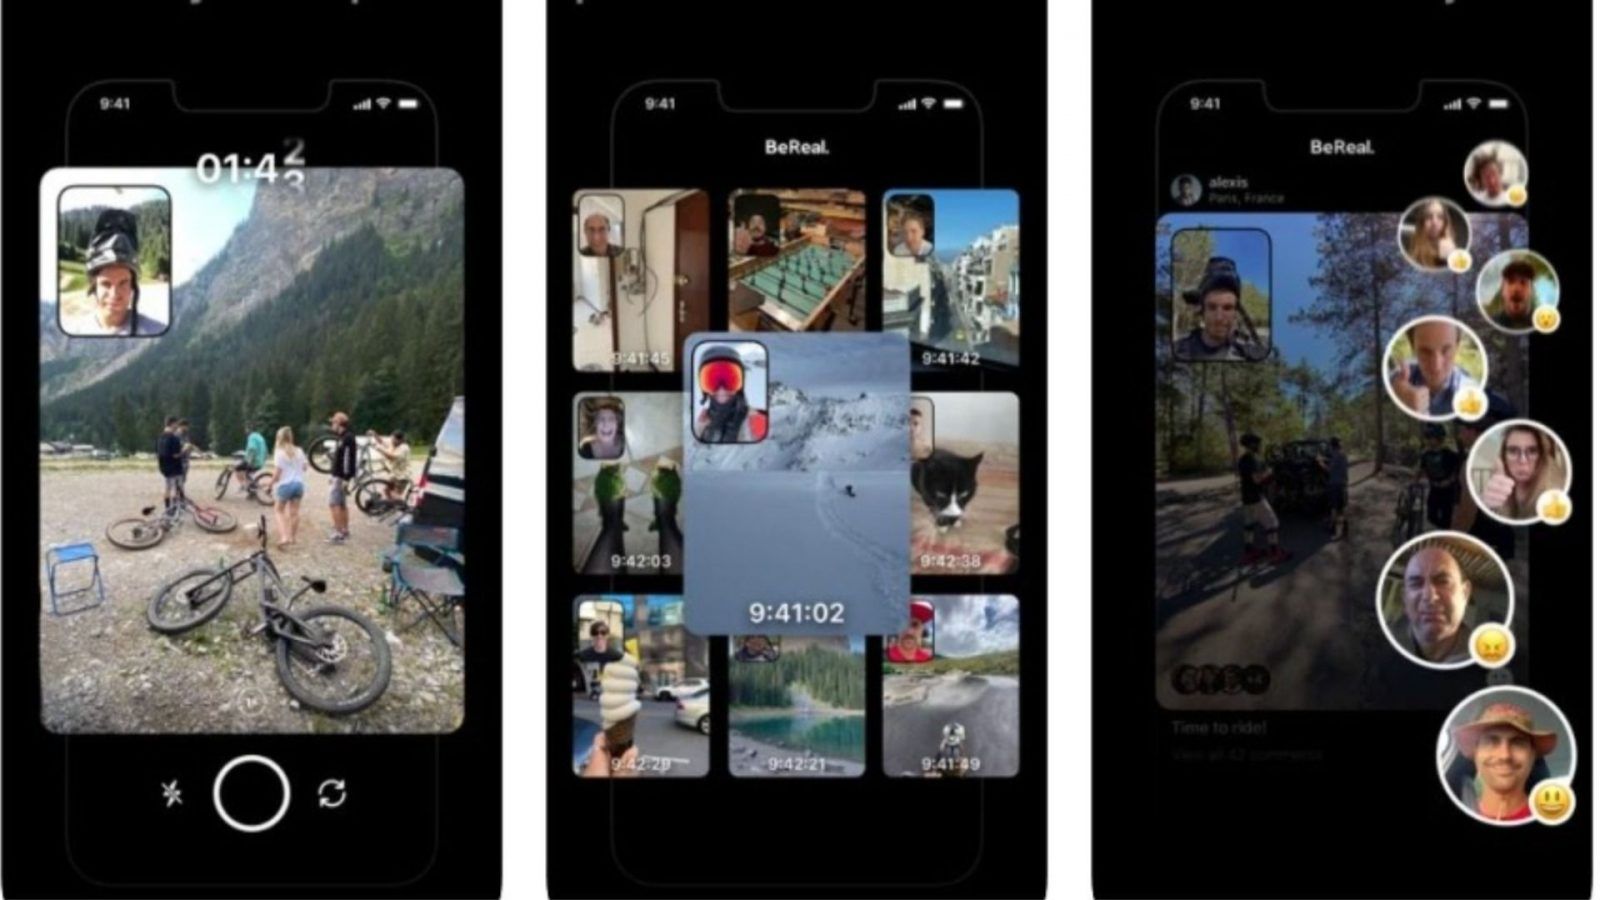 BeReal is a new photo-sharing app that may just take over Instagram